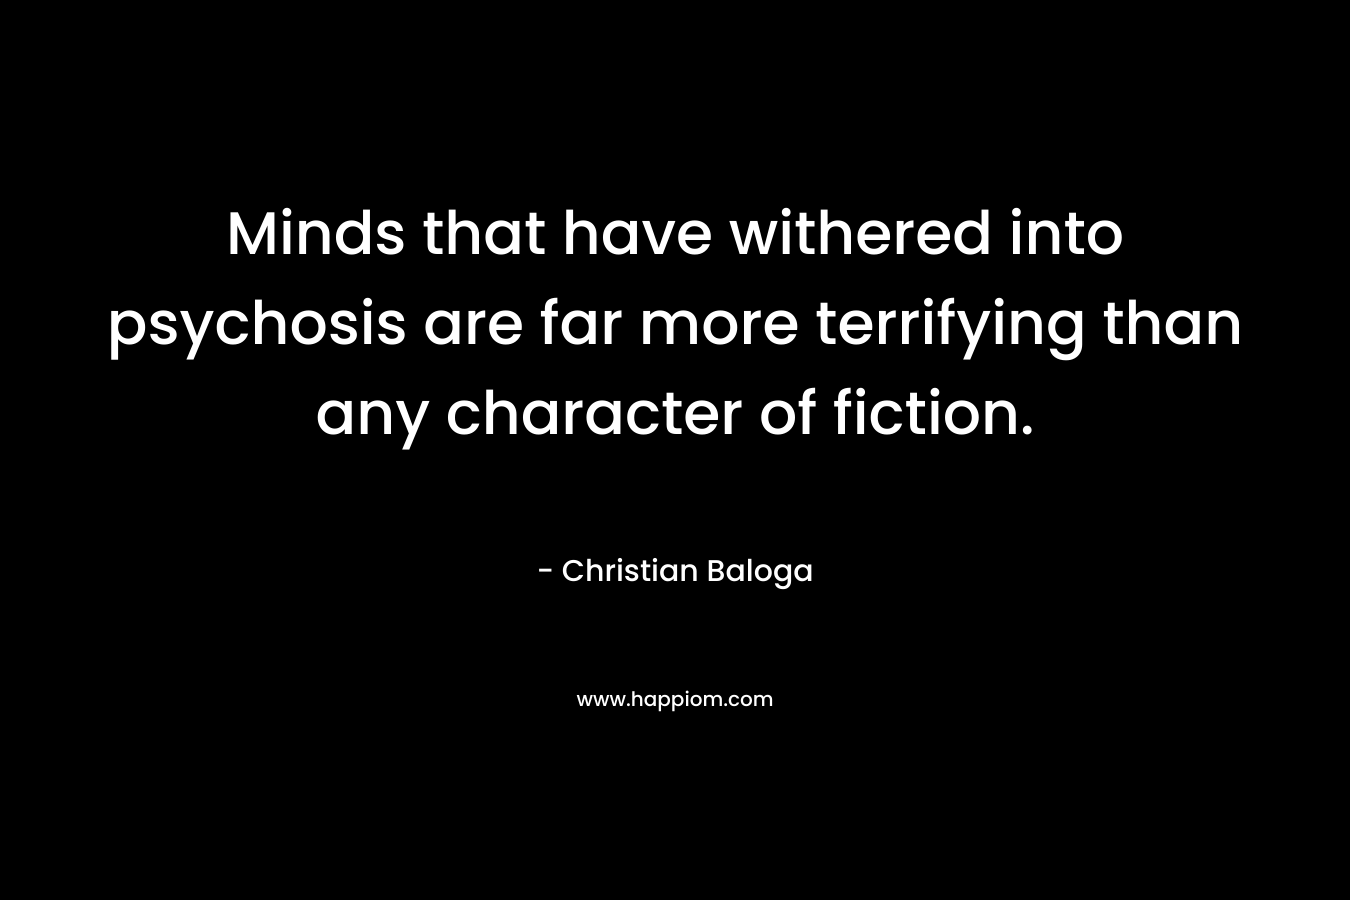 Minds that have withered into psychosis are far more terrifying than any character of fiction. – Christian Baloga